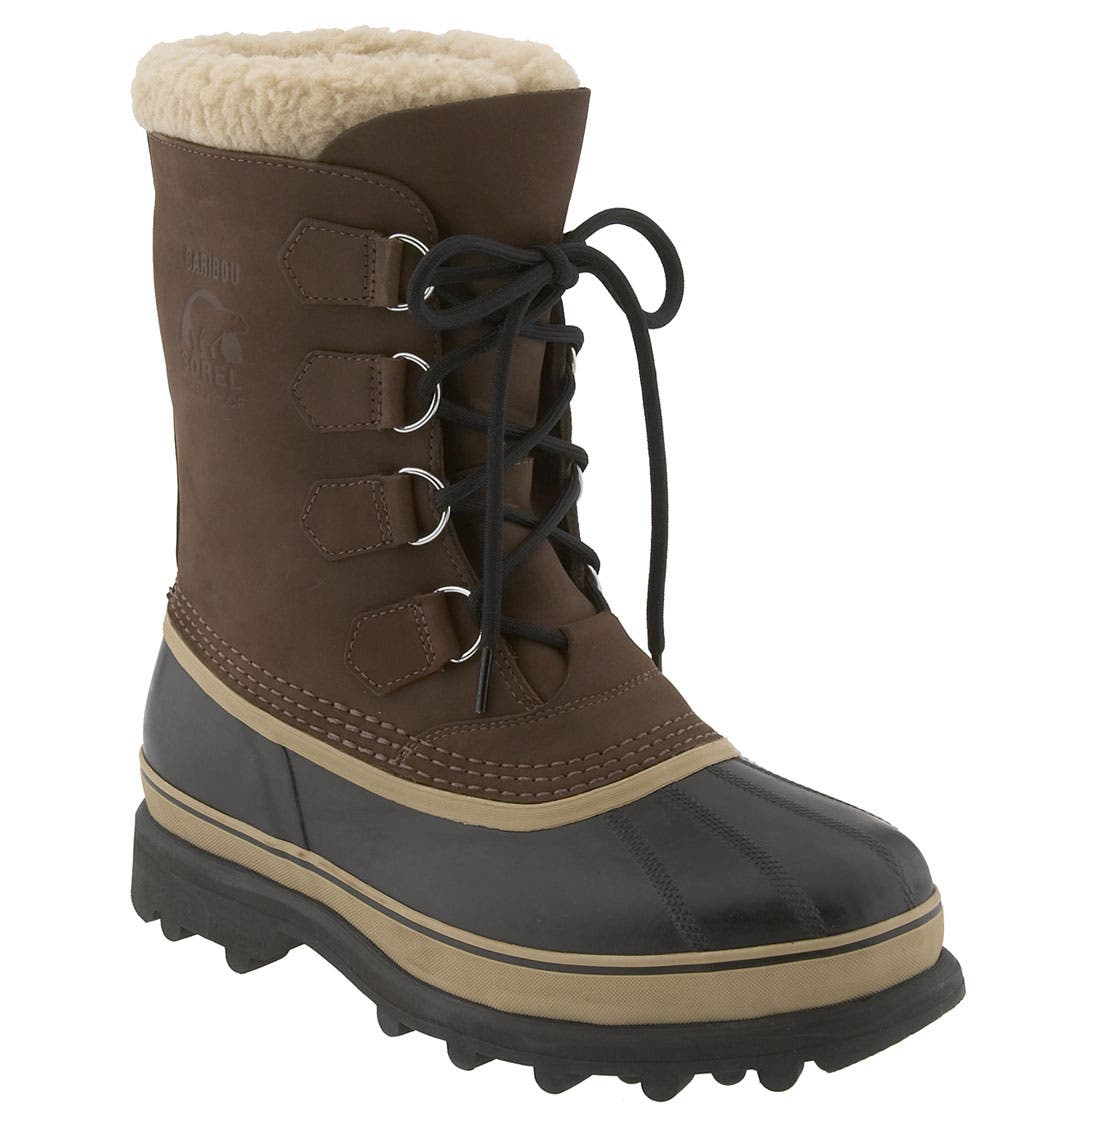 Size 10.5 SOREL 'Caribou' Boot in Brown at Nordstrom,